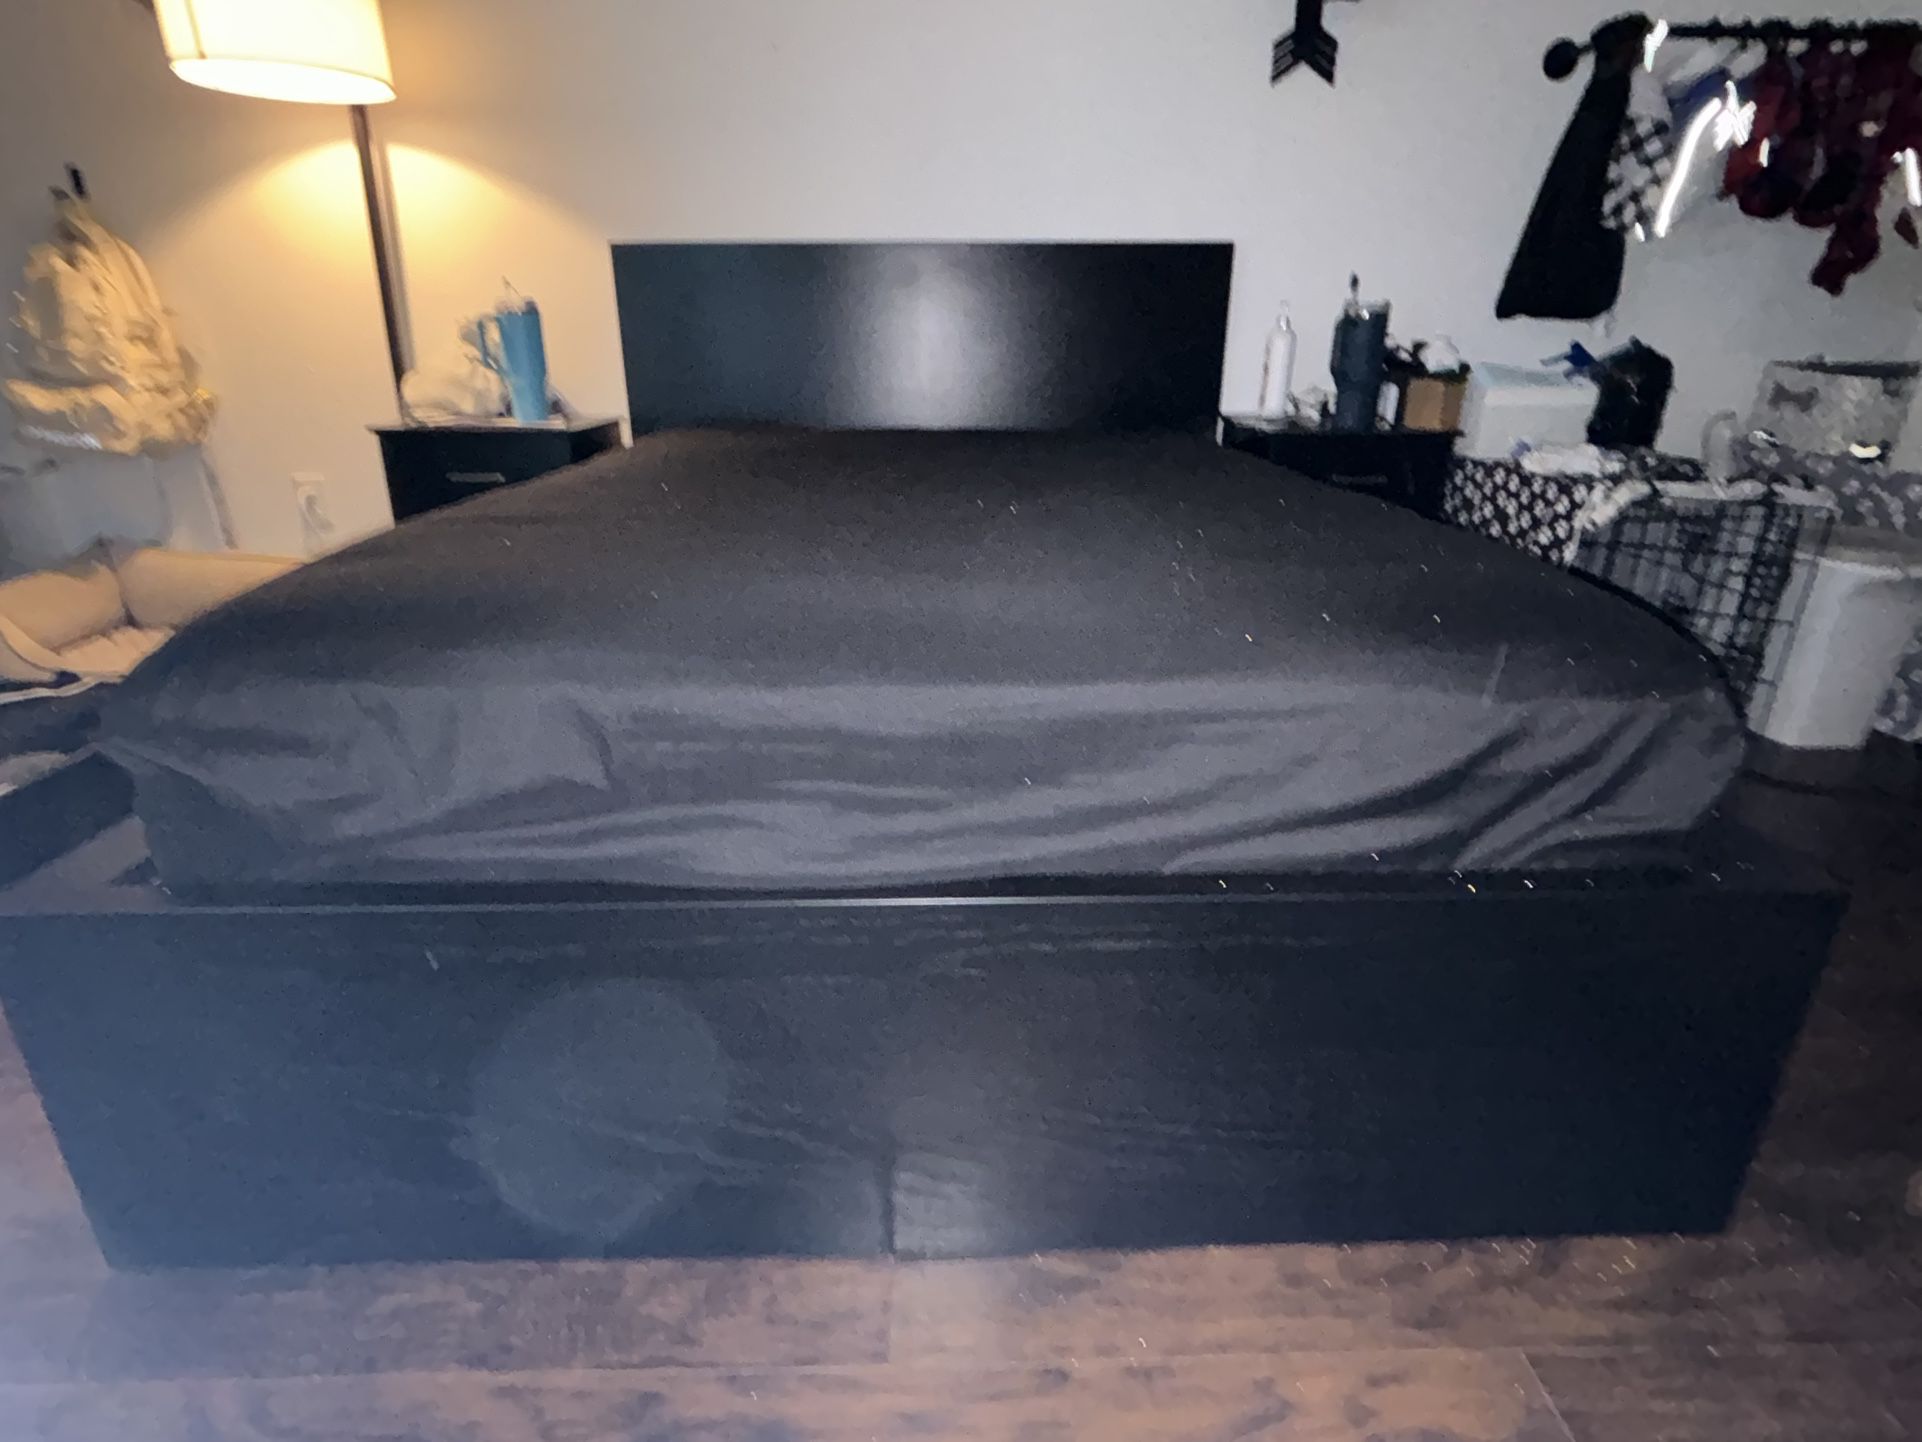 Ikea Malm bed frame and mattress